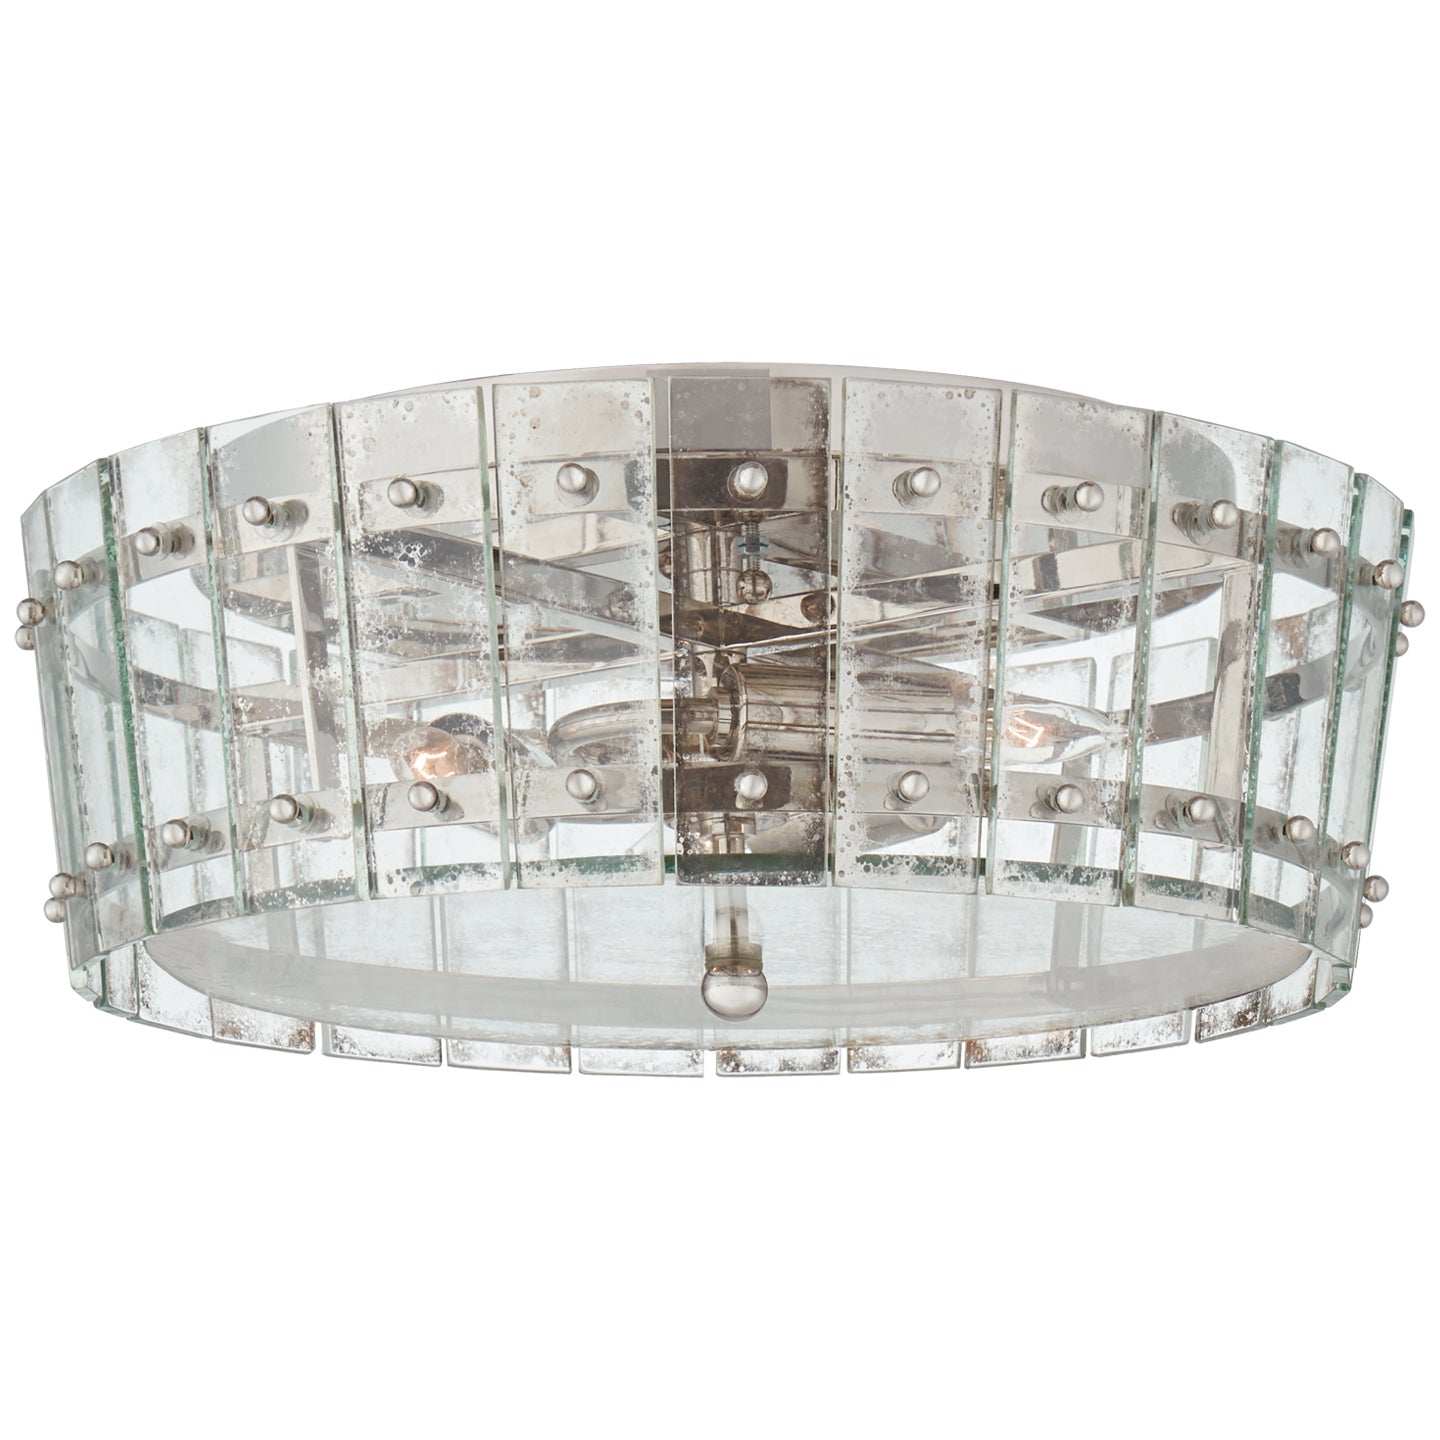 Load image into Gallery viewer, Visual Comfort Signature - S 4651PN-AM - Three Light Flush Mount - Cadence - Polished Nickel
